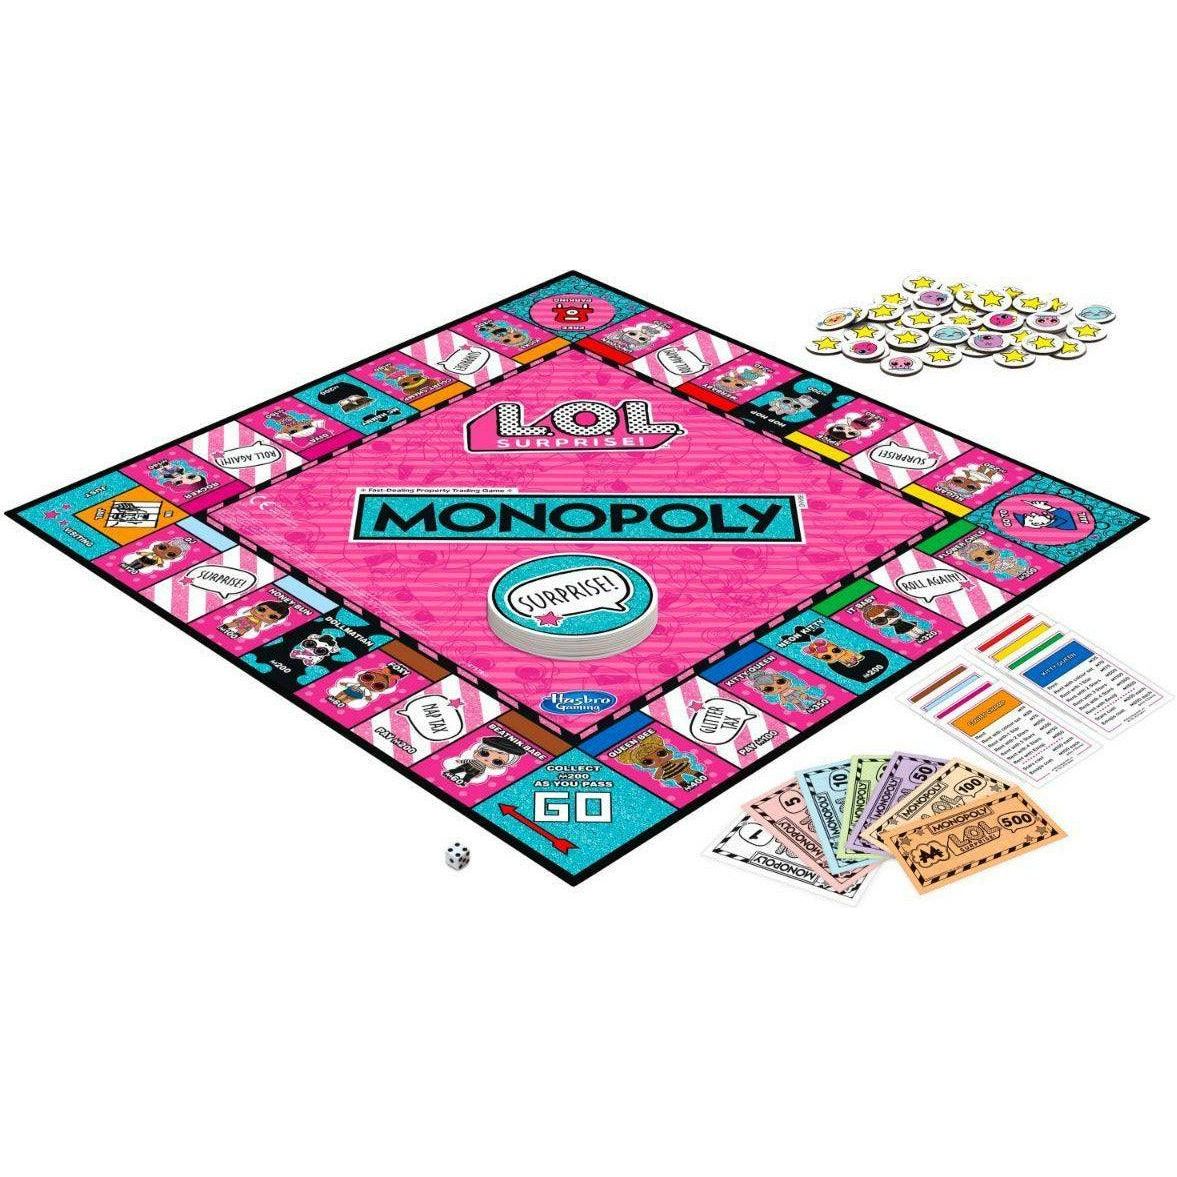 Hasbro Monopoly L.O.L Surprises Edition Board Game - BumbleToys - 8-13 Years, Card & Board Games, Eagle Plus, Girls, L.O.L, Monopoly, Puzzle & Board & Card Games